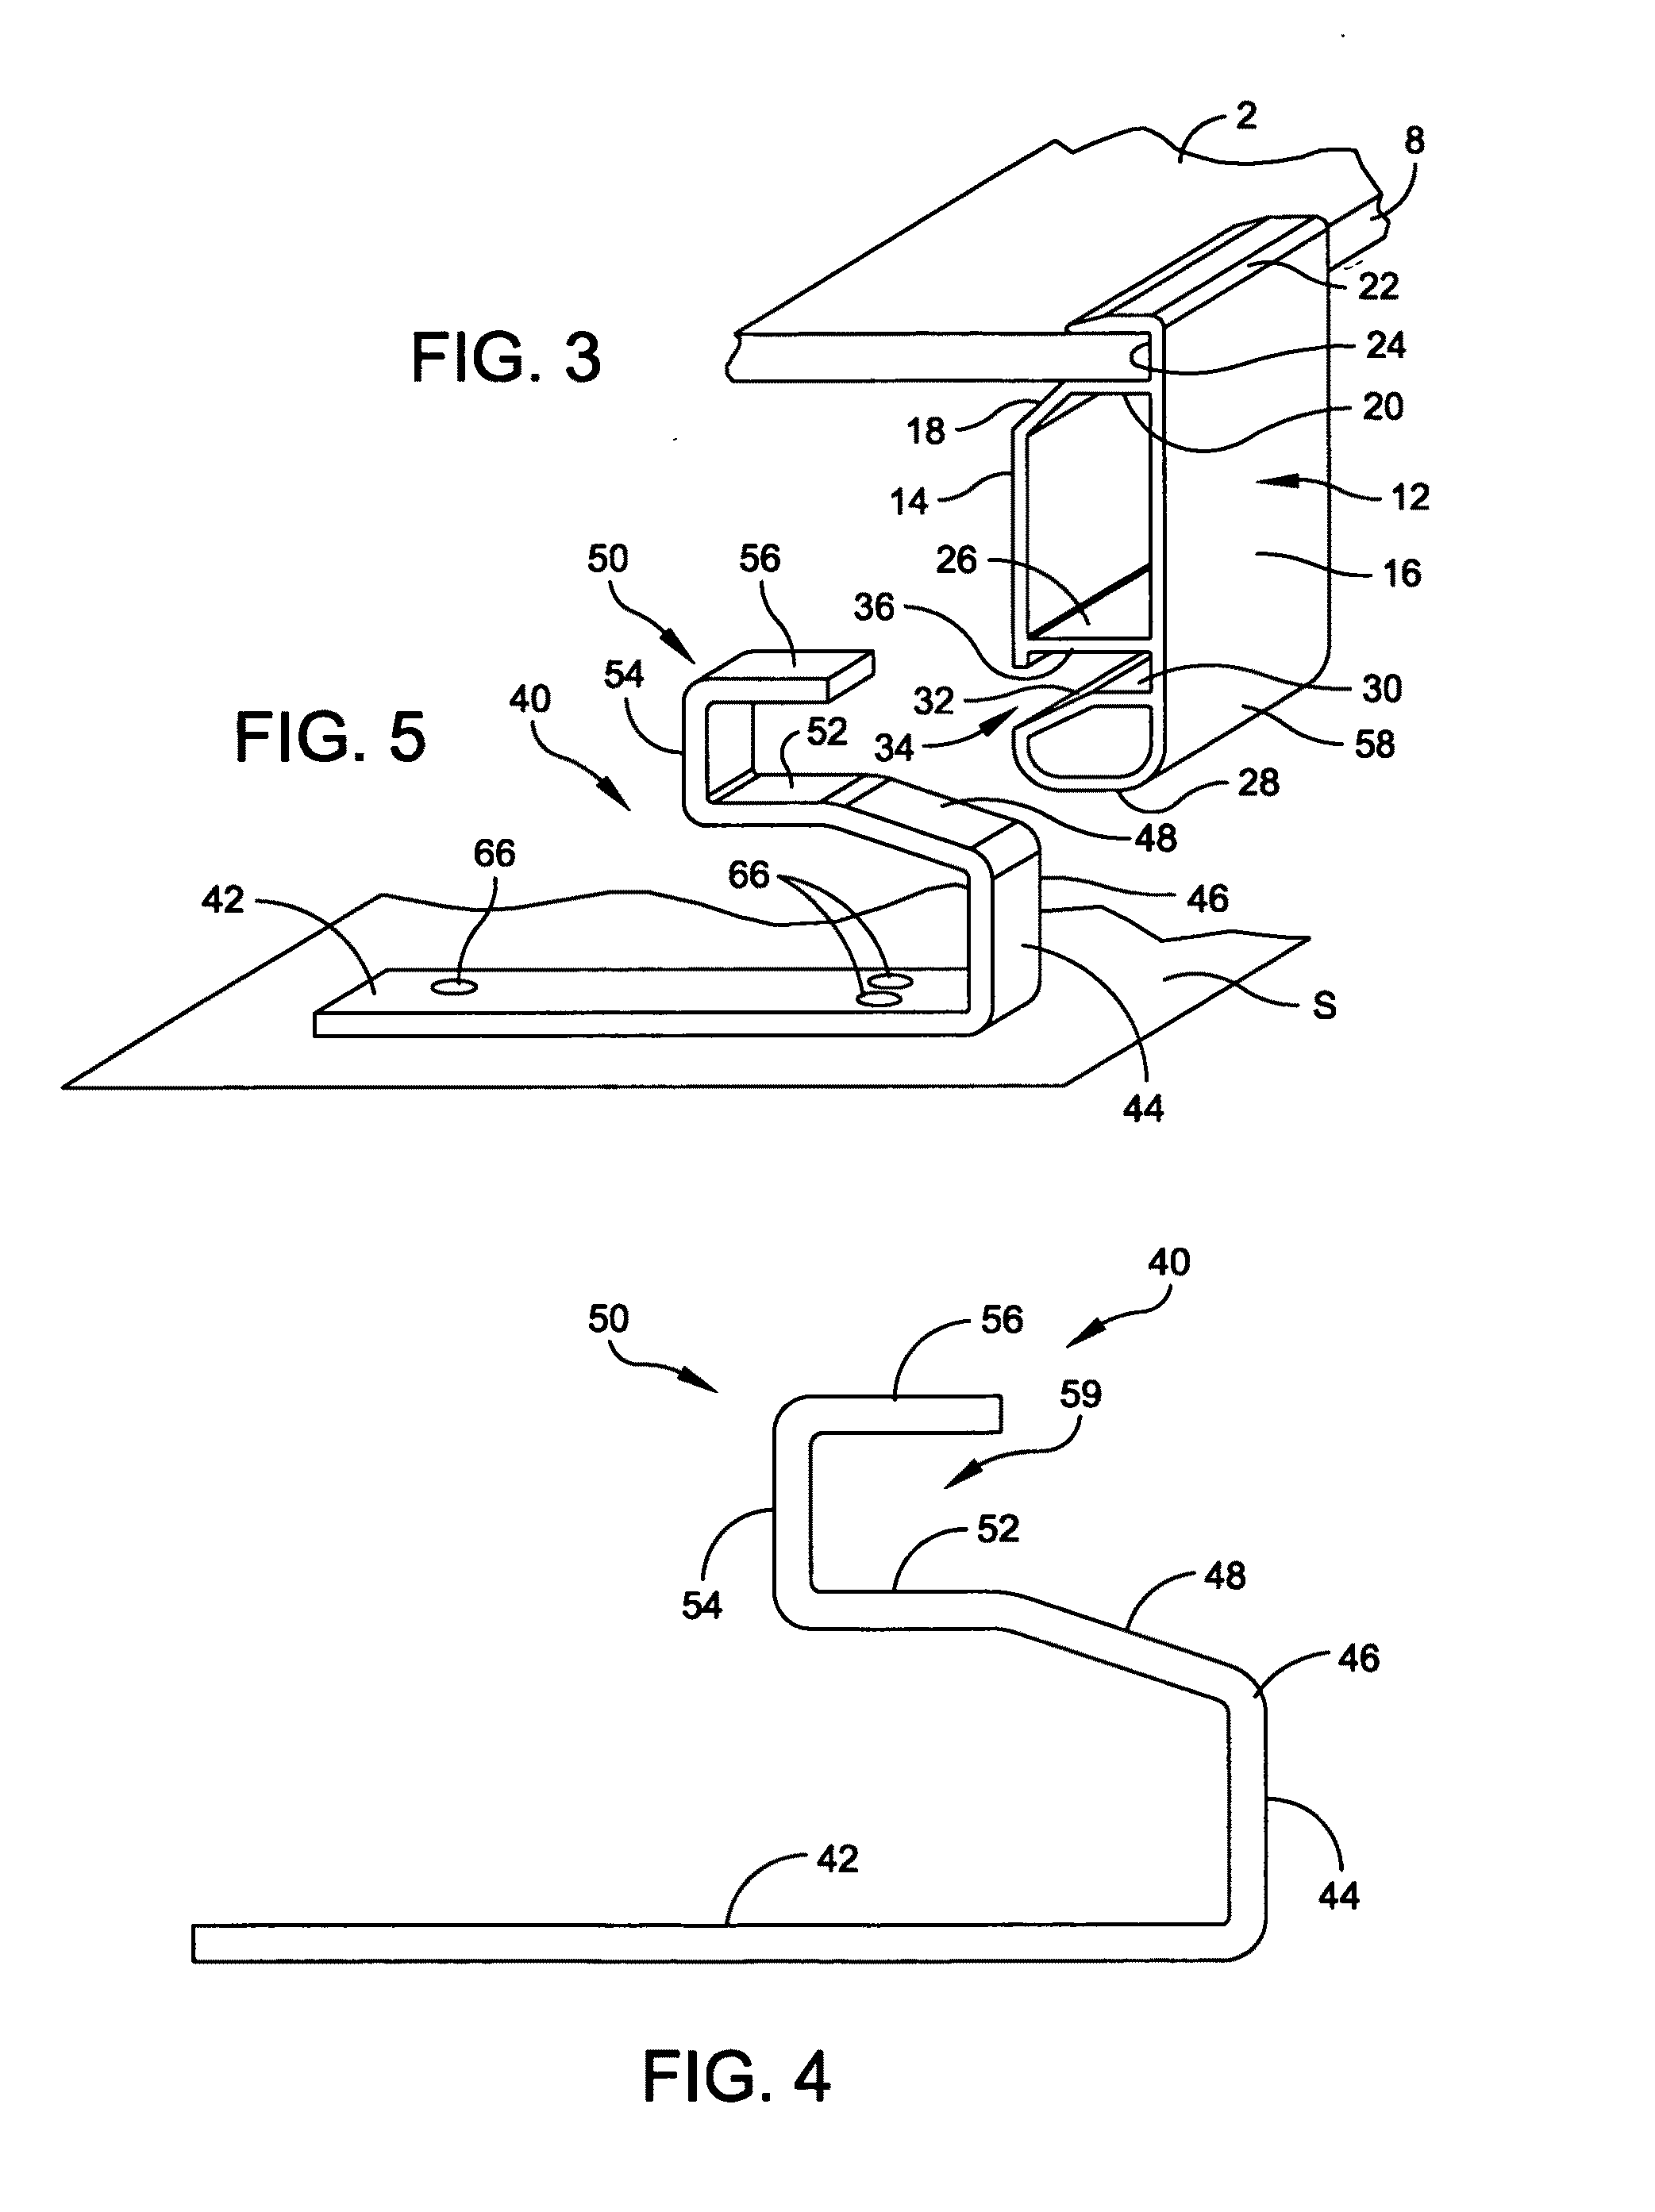 Assembly and method for mounting solar panels to structural surfaces